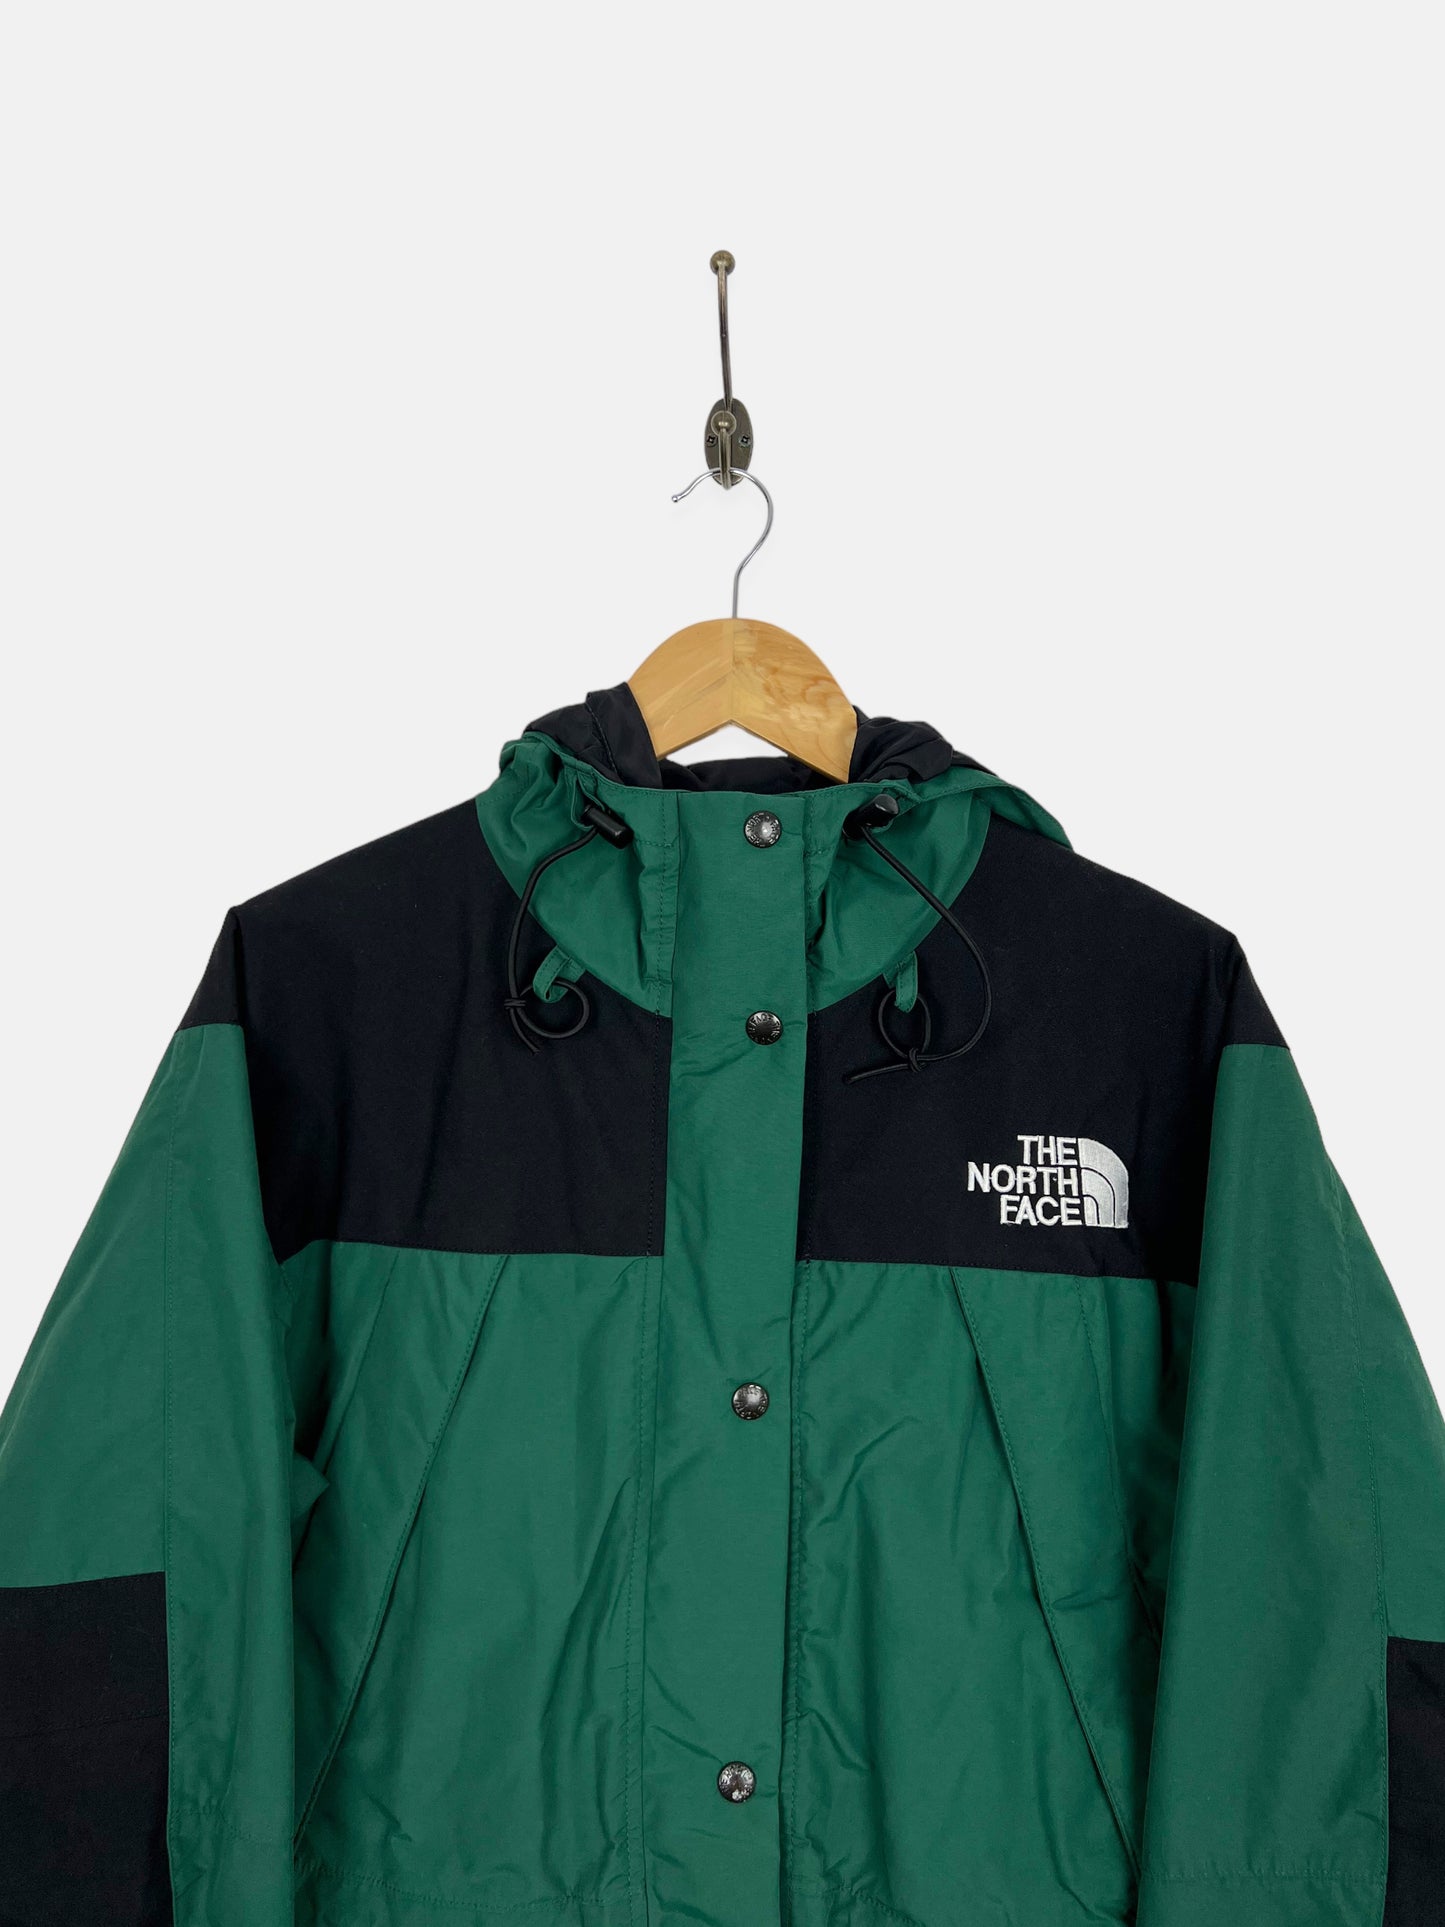 90's The North Face Gore-Tex Embroidered Vintage Jacket with Hood Size M